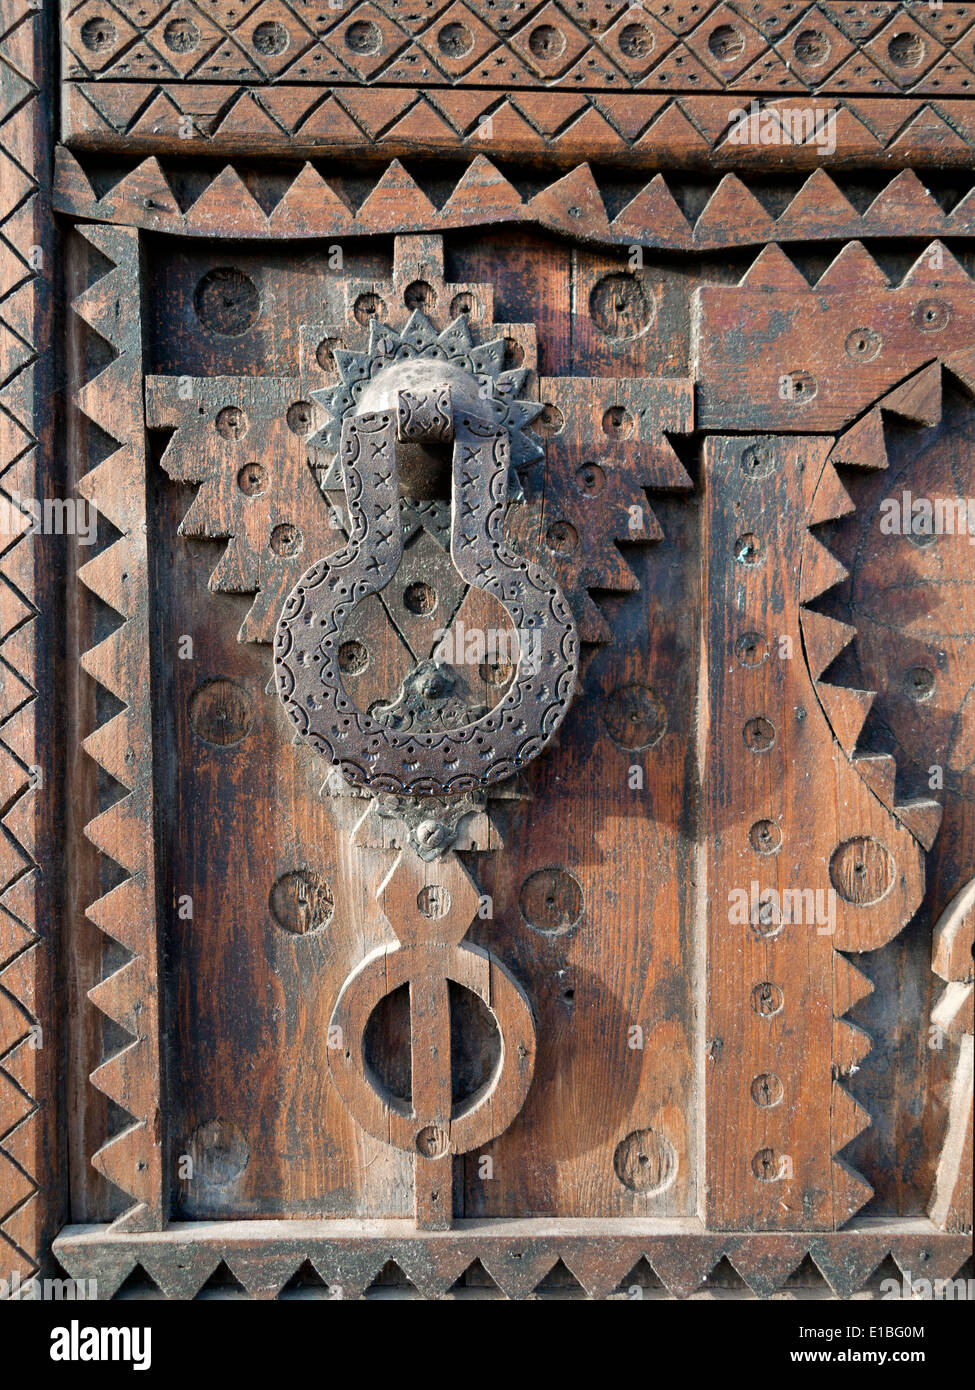 Close up detail of carved wood on a Moroccan door with black iron knocker and handle Stock Photo